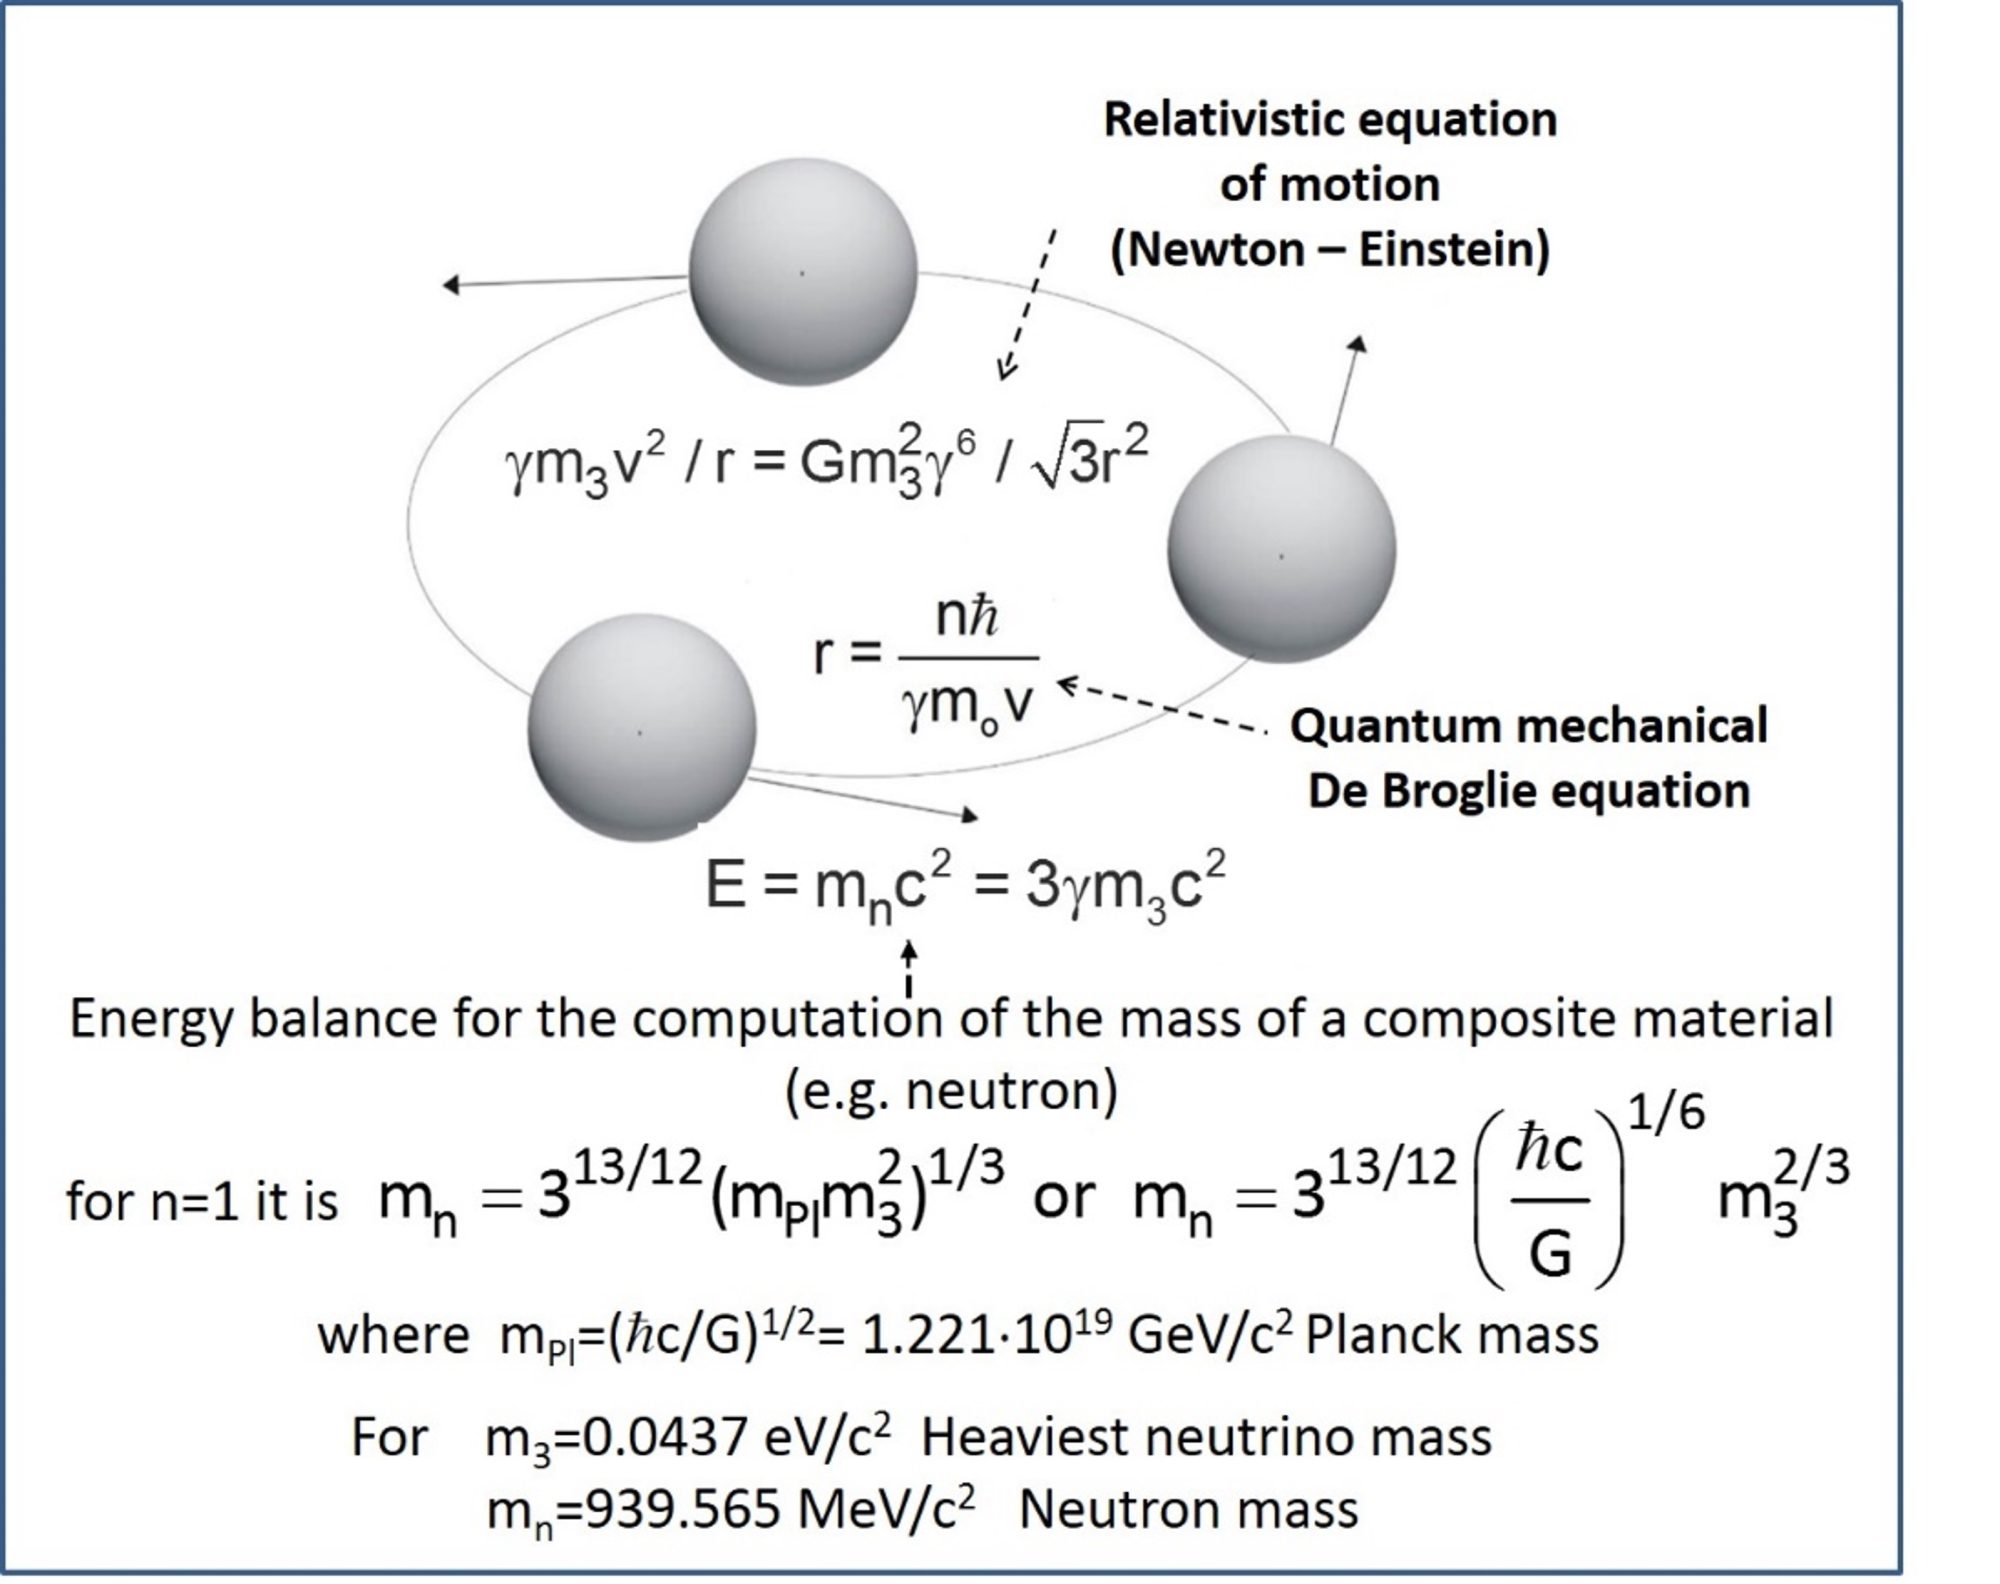 Figure 1: Combining Einstein’s Special Relativity (8) with De Broglie’s equation of Quantum Mechanics (9) to analyze and mathematically solve the Rotating Lepton Model (RLM) for the computation of the neutron mass from the rest mass, m3, of the heaviest neutrino. (5)